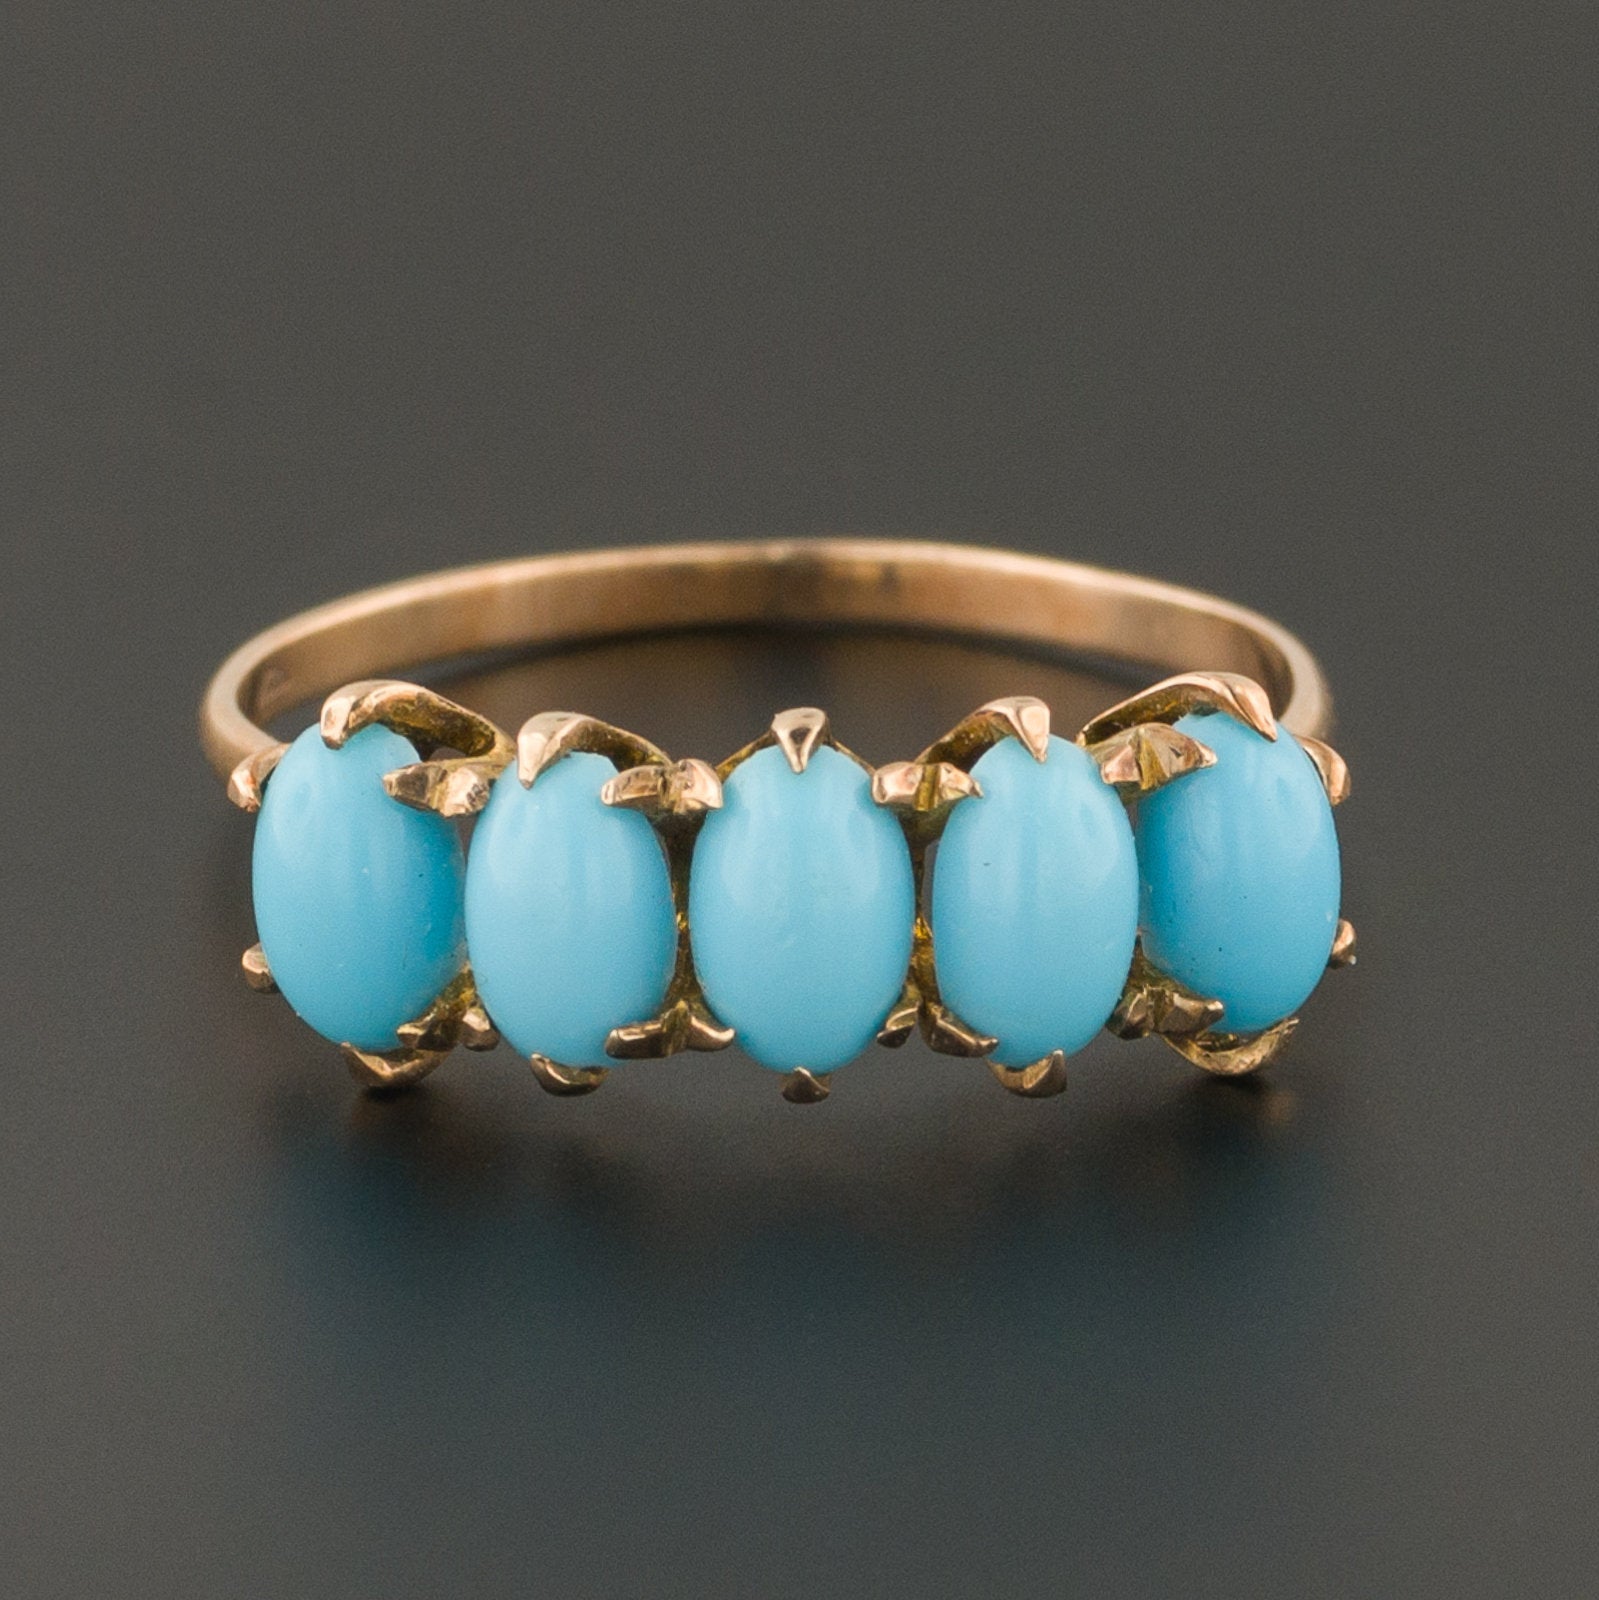 10k Gold Turquoise Glass Ring | Antique Turquoise Glass Ring | 10k Gold Ring | Turquoise Glass Row Ring